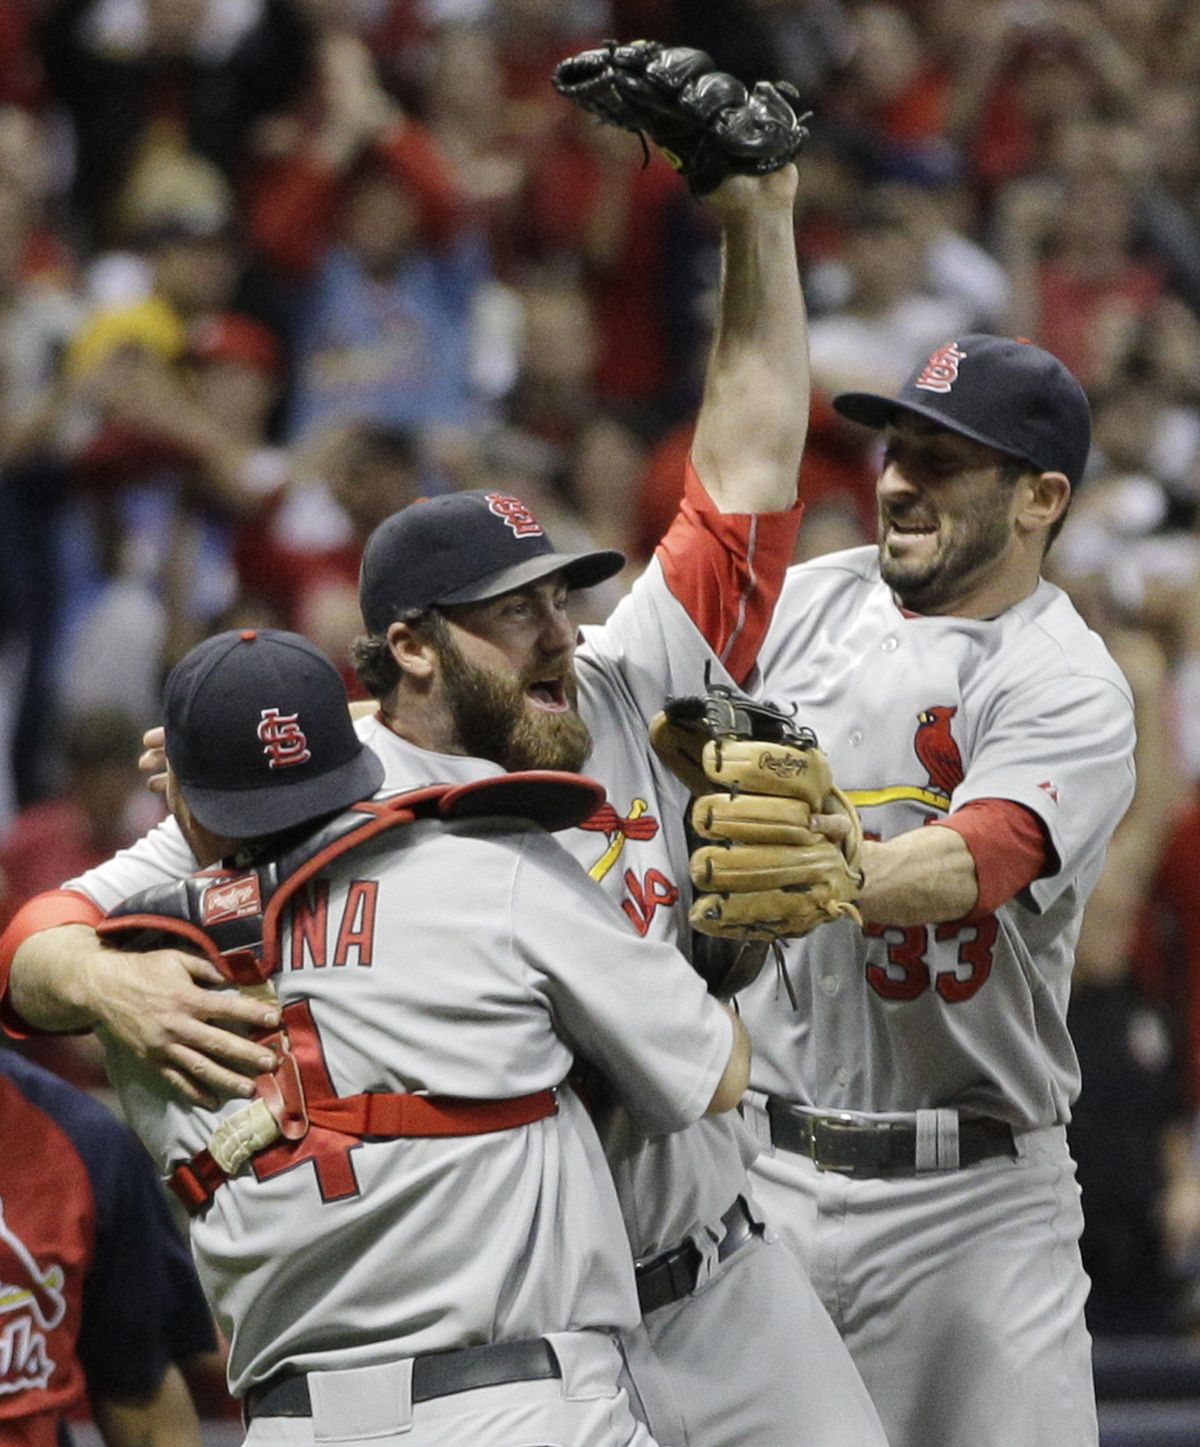 St. Louis’ Yadier Molina (4), Jason Motte and Daniel Descalso (33) celebrate after winning the N.L. pennant. (Associated Press)